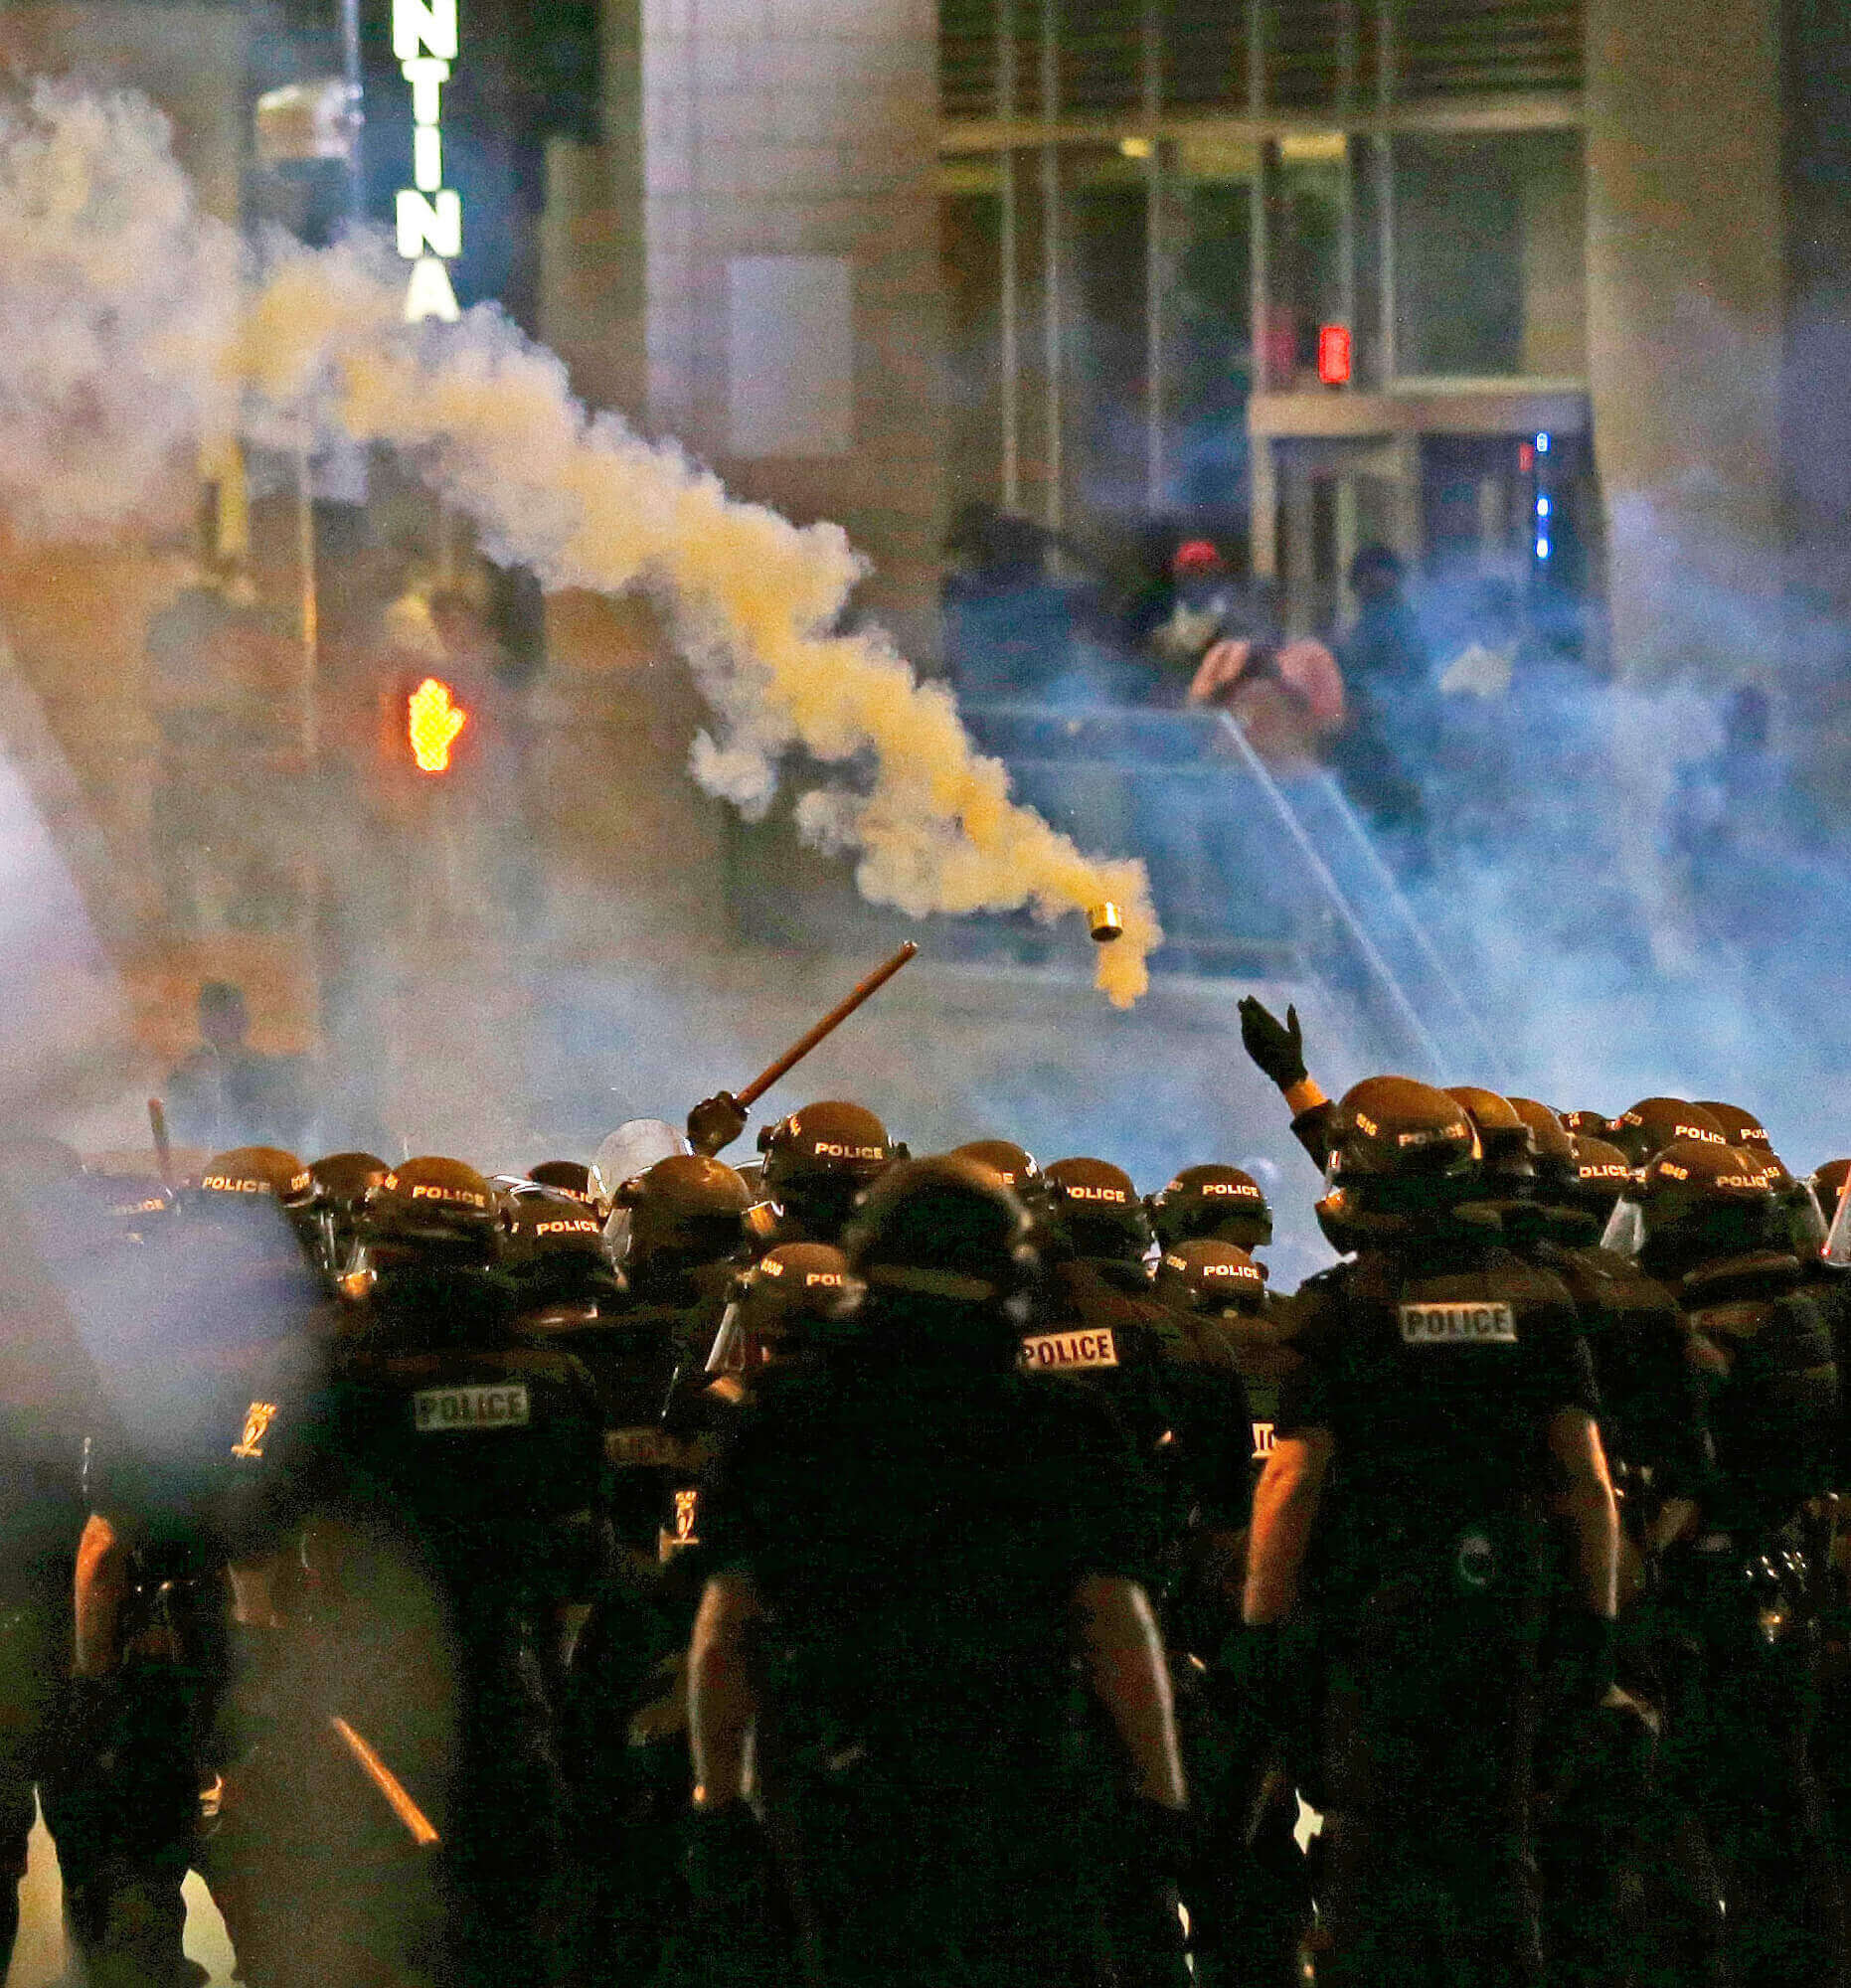 Image of police tear gassing protesters